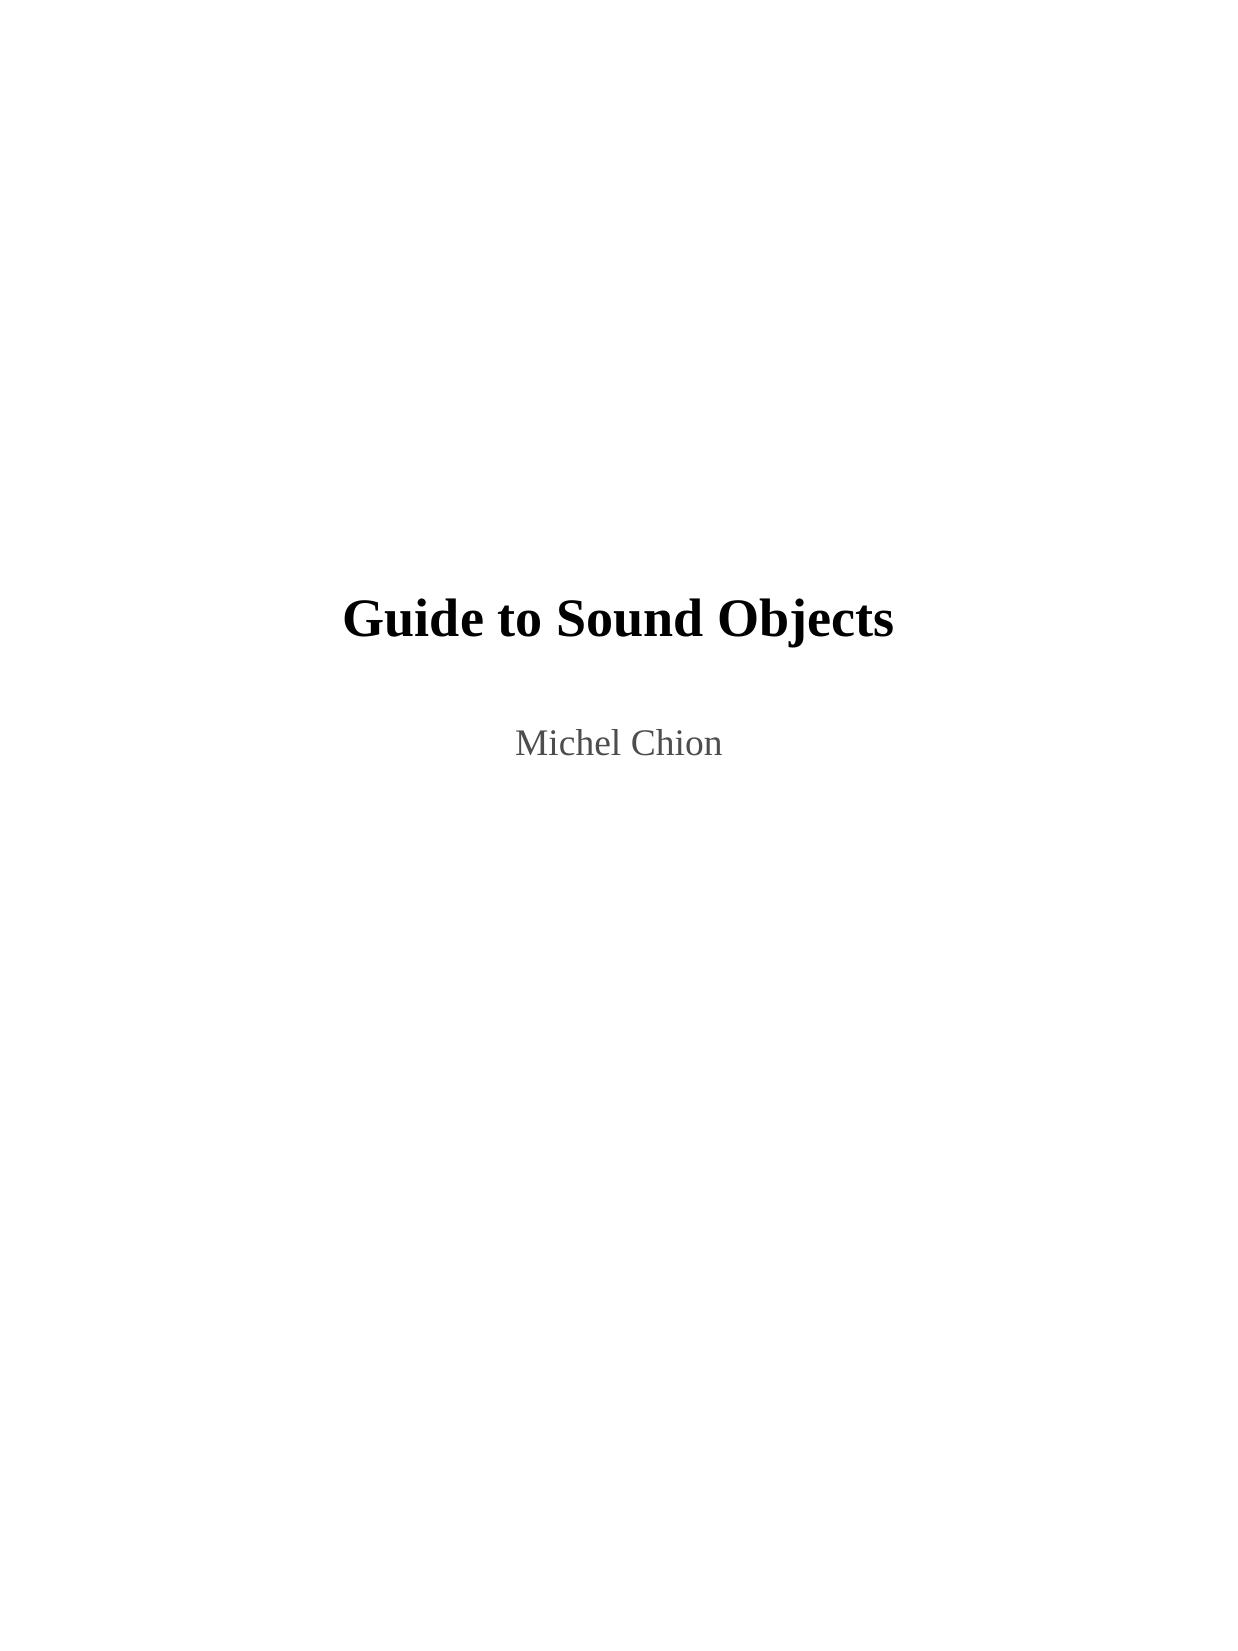 Guide to Sound Objects by eXPerience